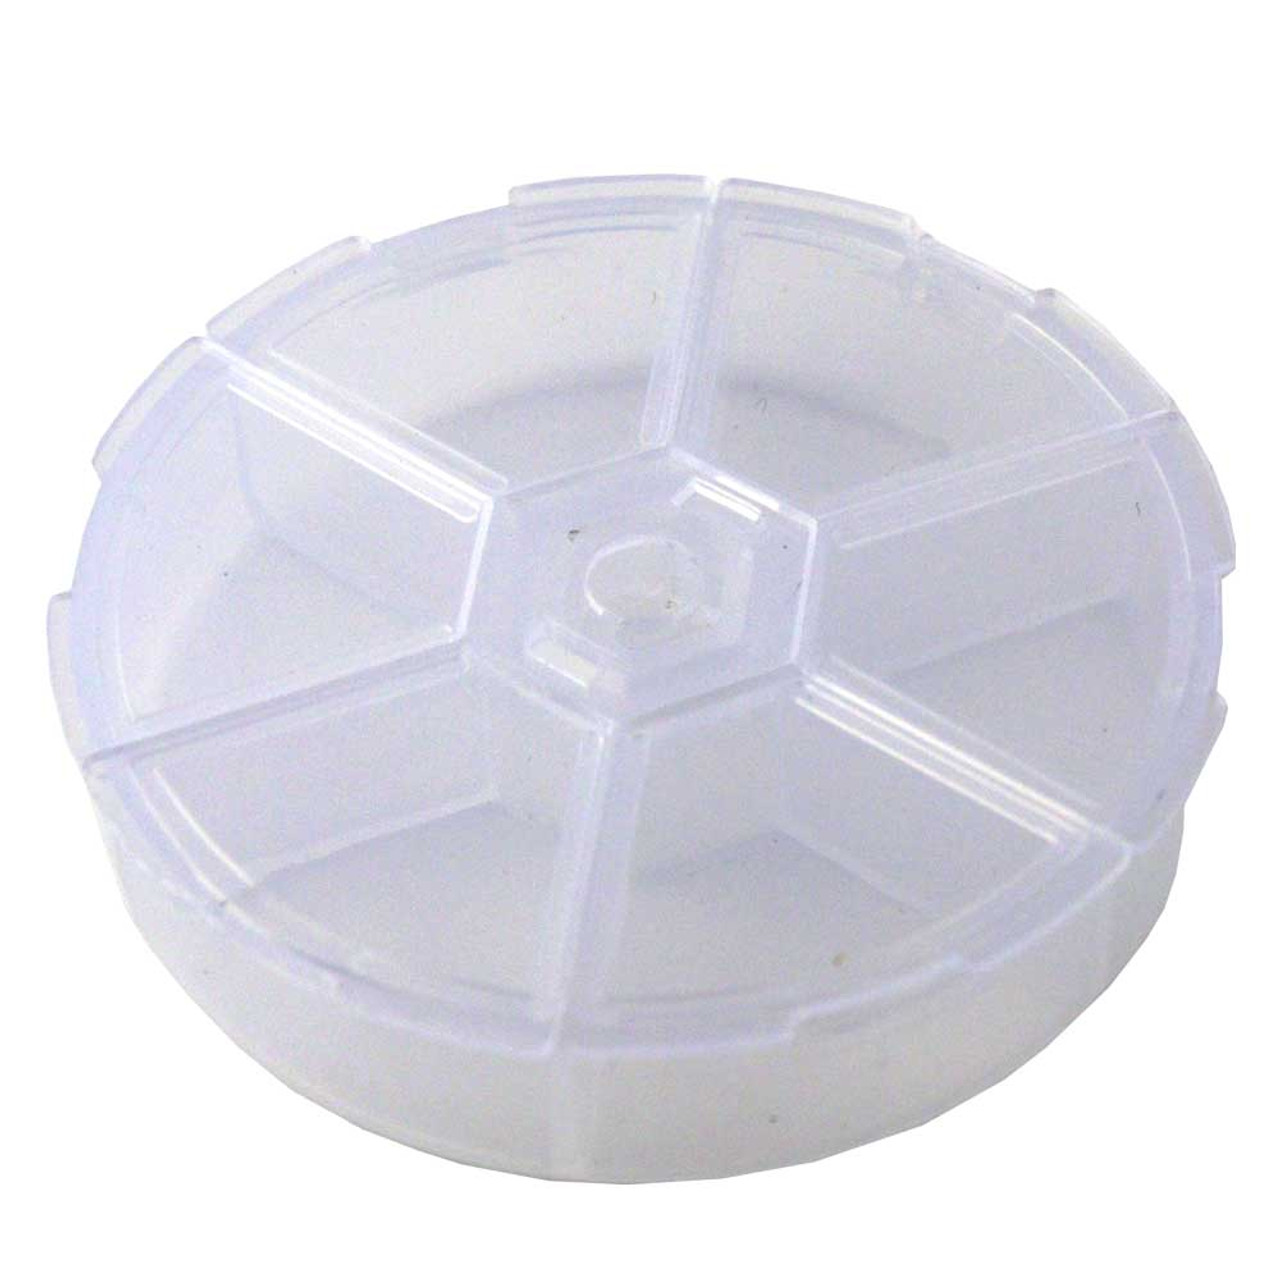 Mini 6 Compartment Round Plastic Storage Box with Snap Closure CLEARANCE